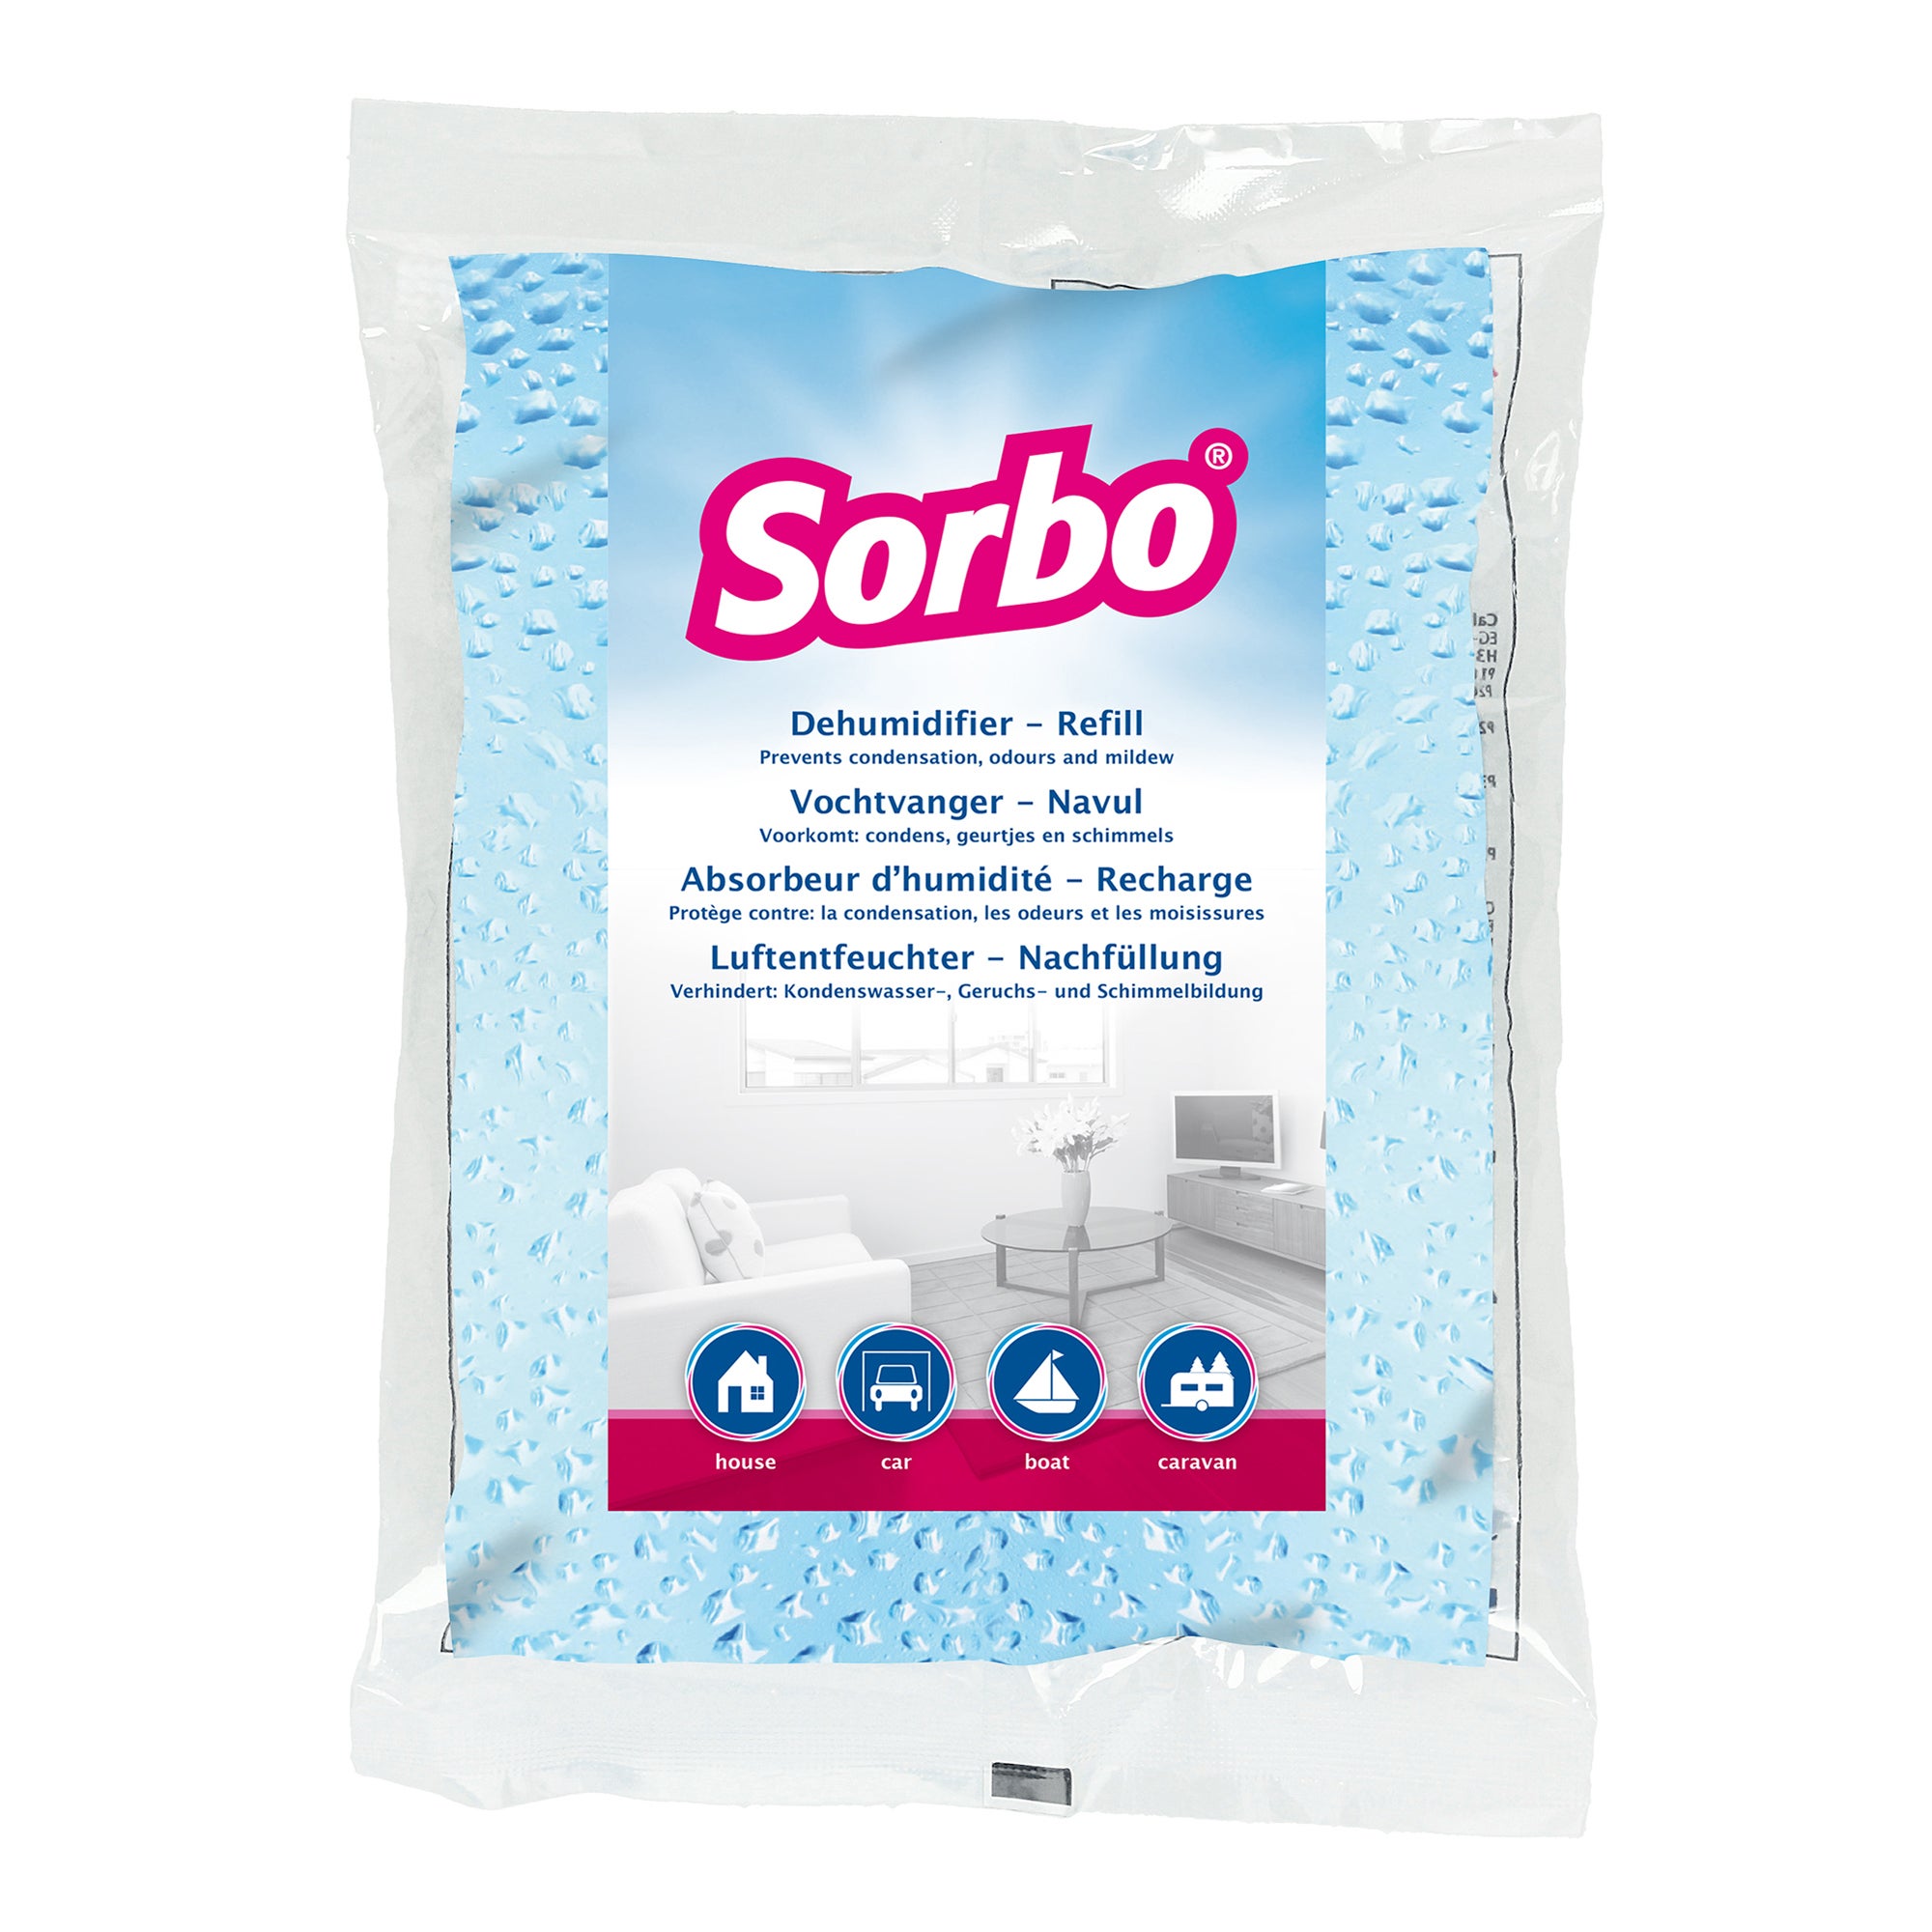 Moisture Absorbing Sachets for Home, Car, Boats and Caravans.